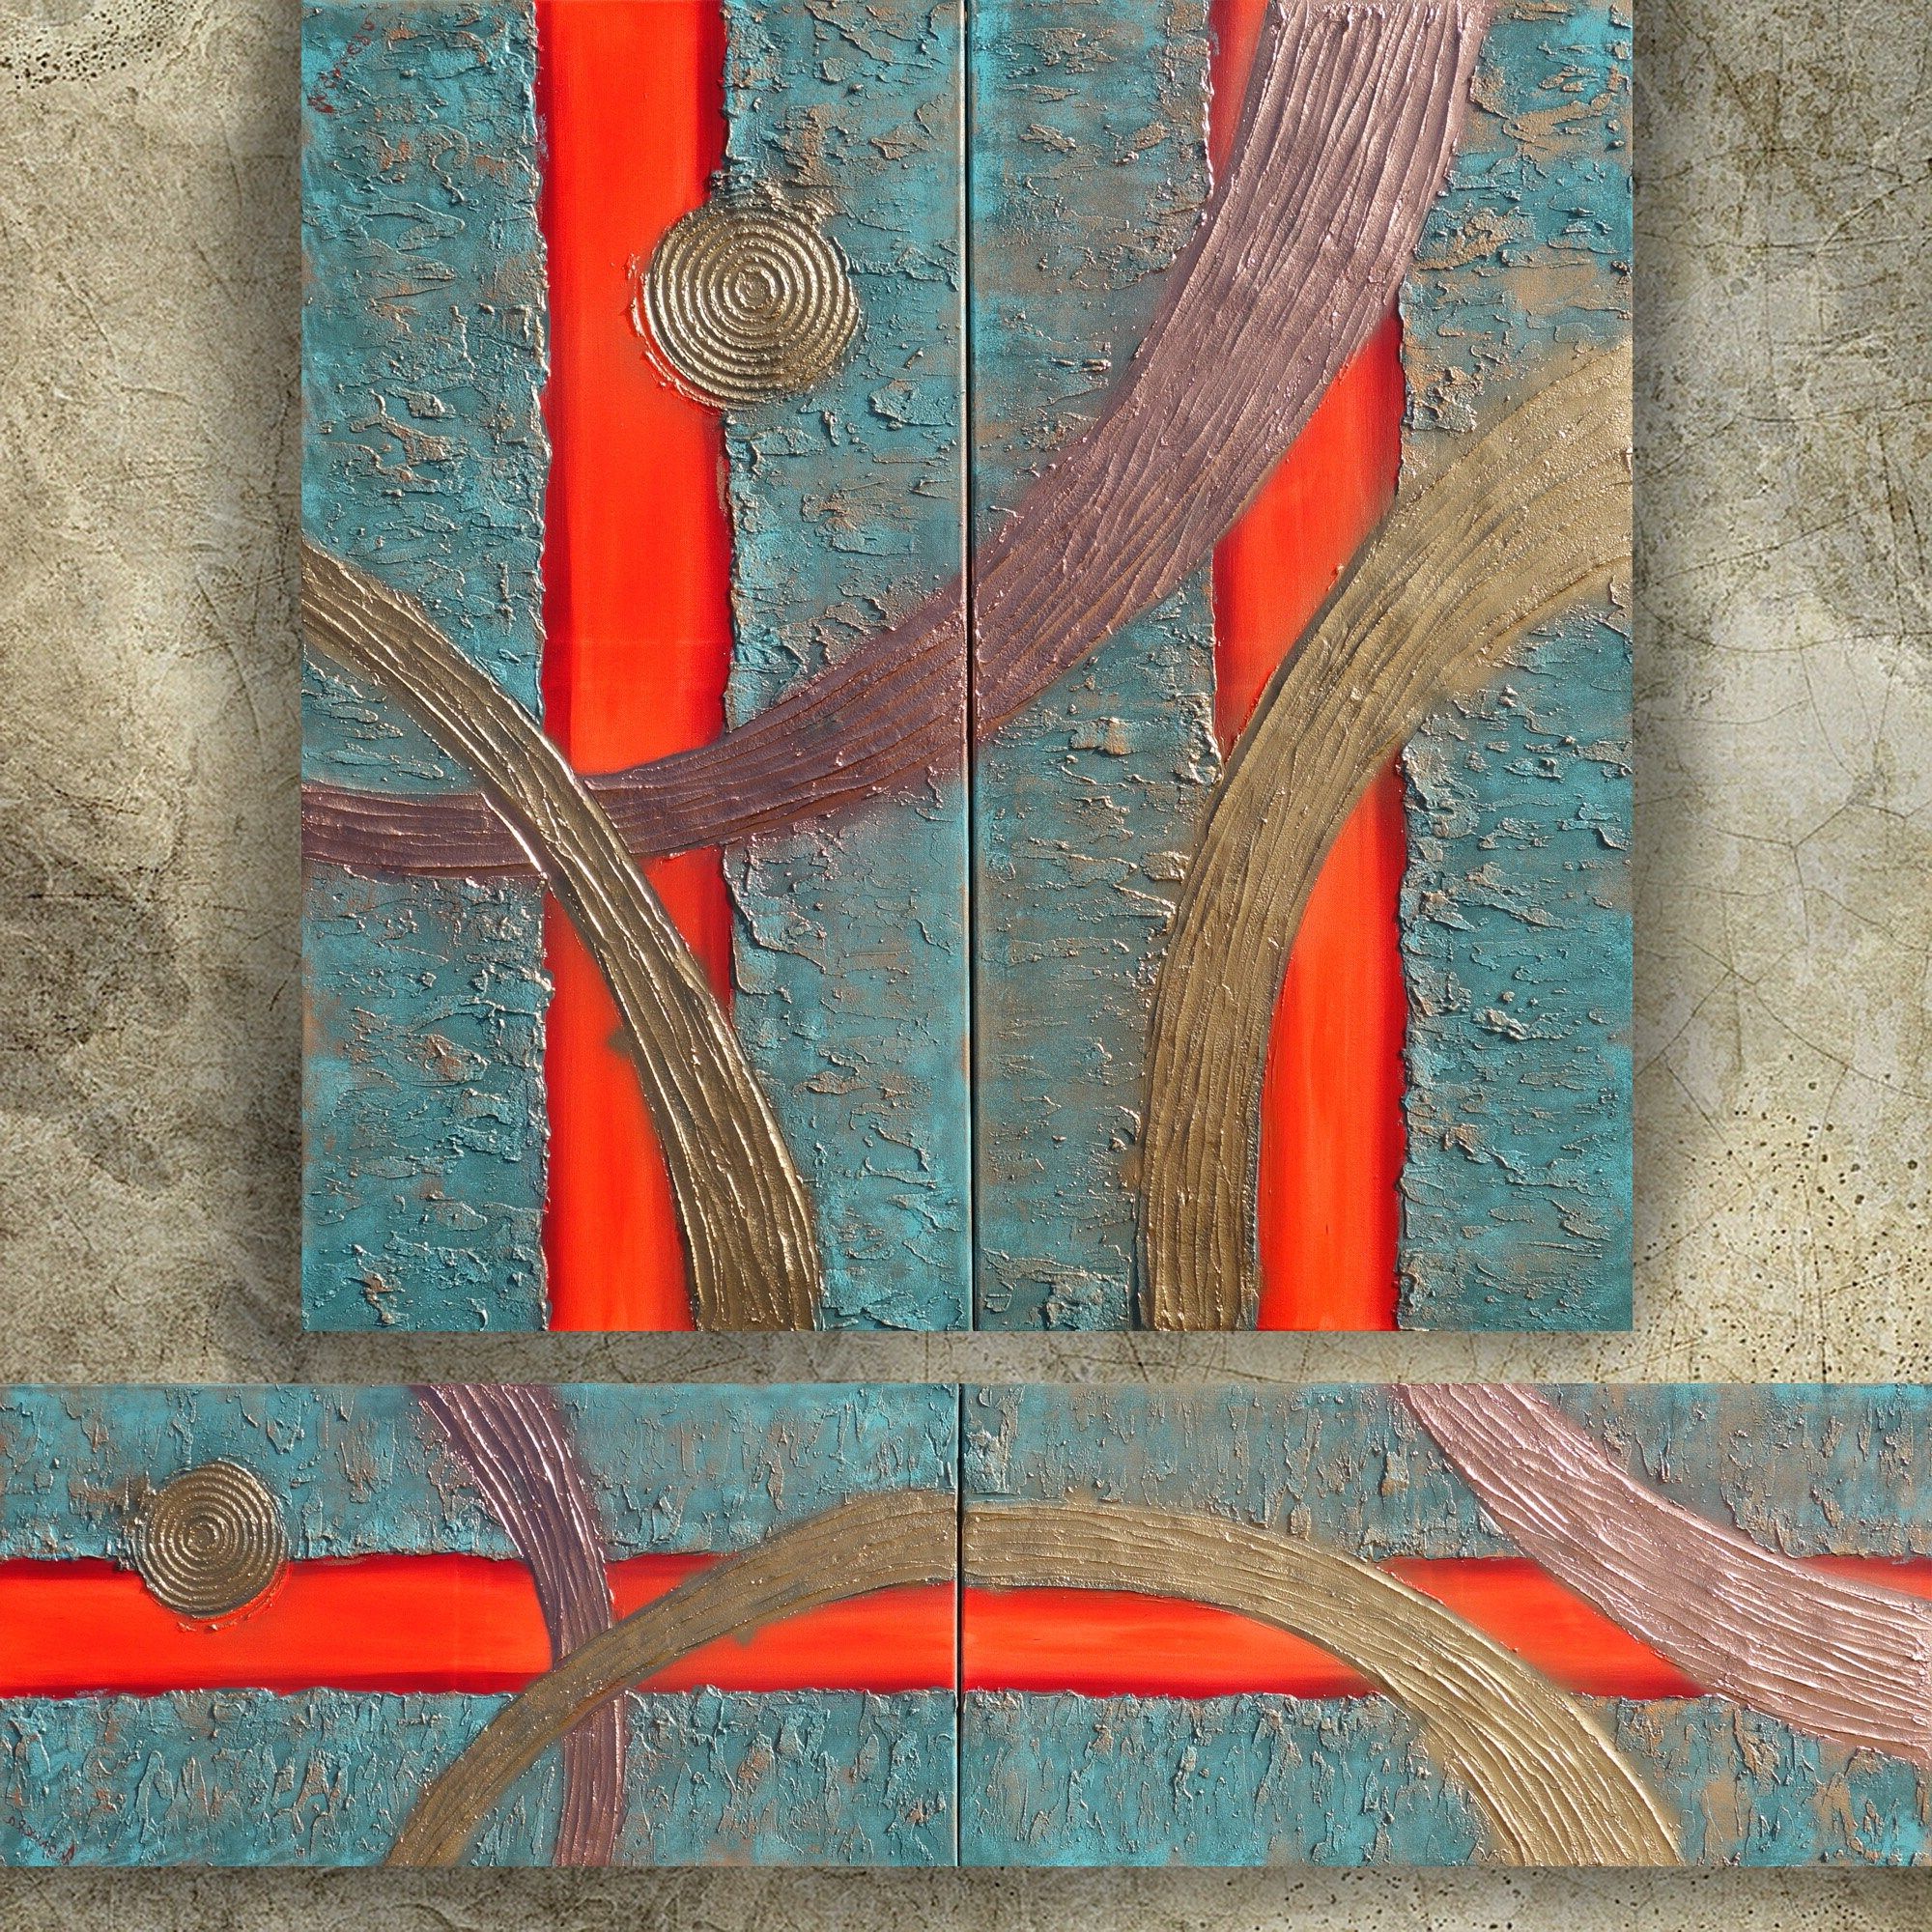 Latest Mid Century Modern Art A291 Copper Patina Hot Orange Regarding Mid Century Modern Wall Art (View 19 of 20)